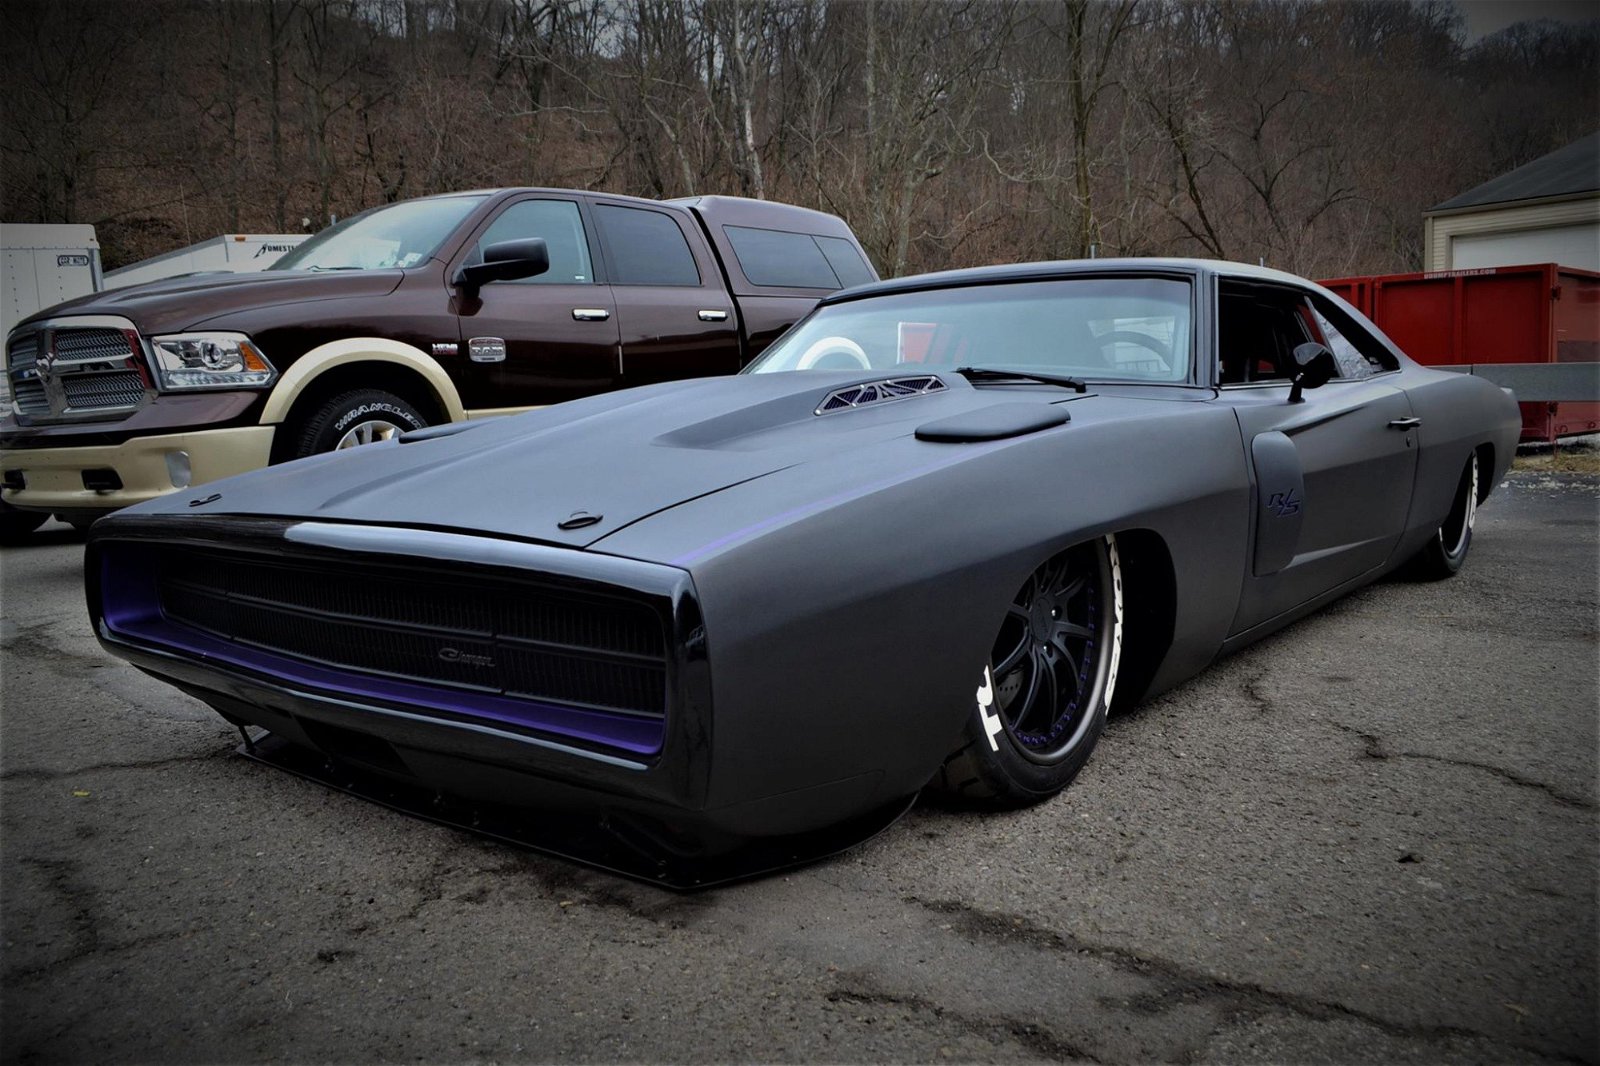 1970 Dodge Charger 